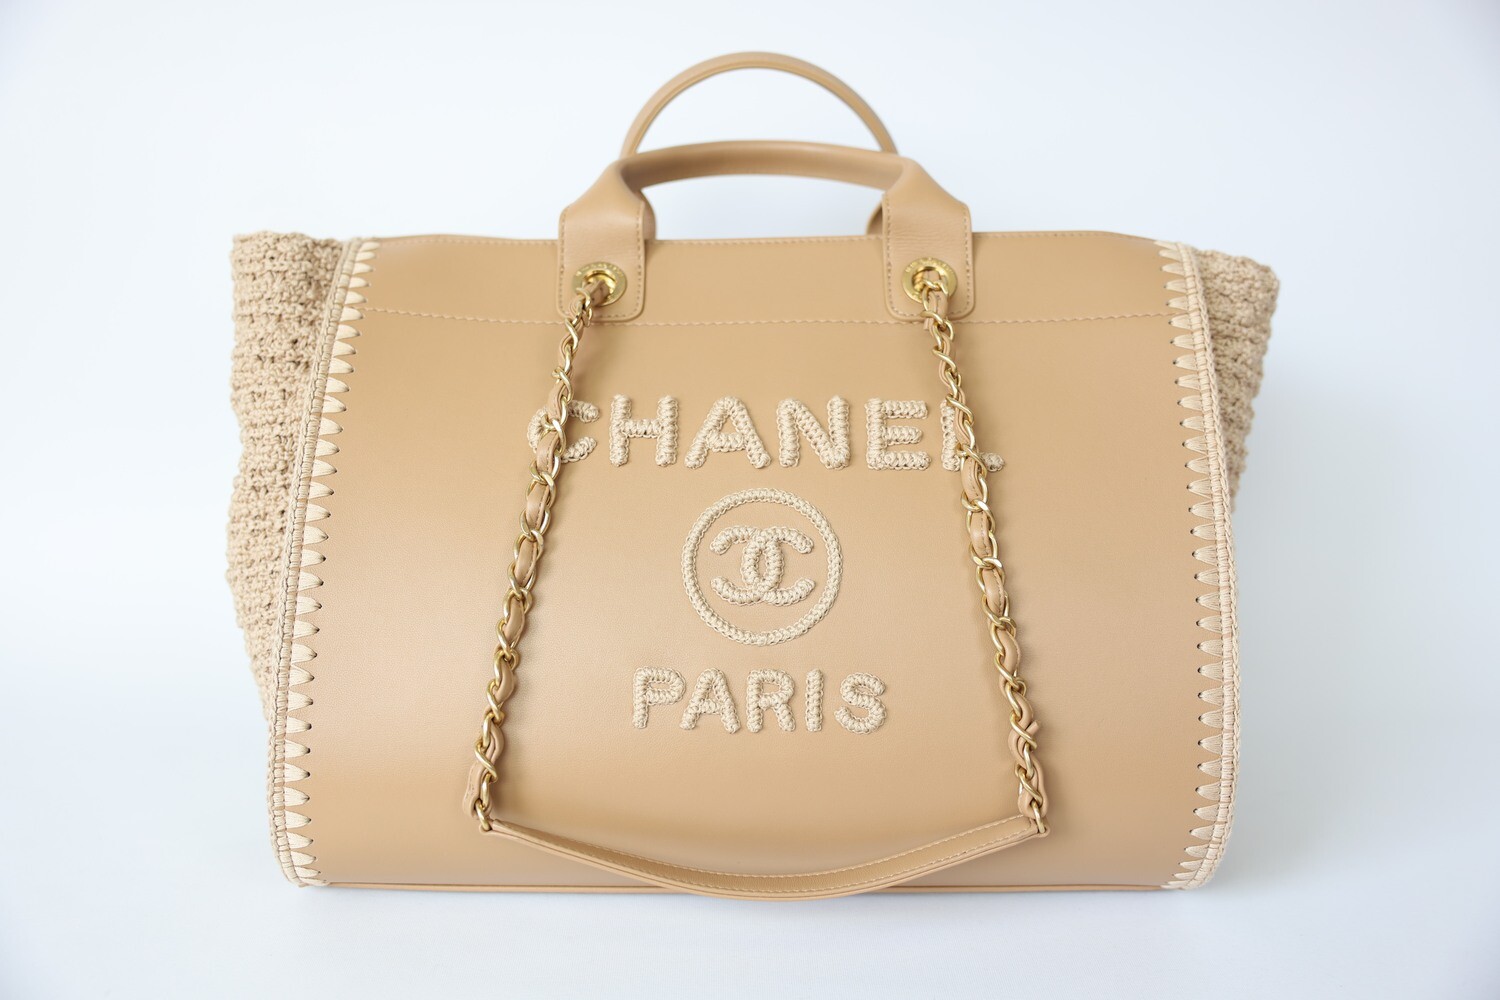 Chanel Deauville Large, Tan Leather and Woven Fabric with Gold Hardware, Preowned in Box WA001